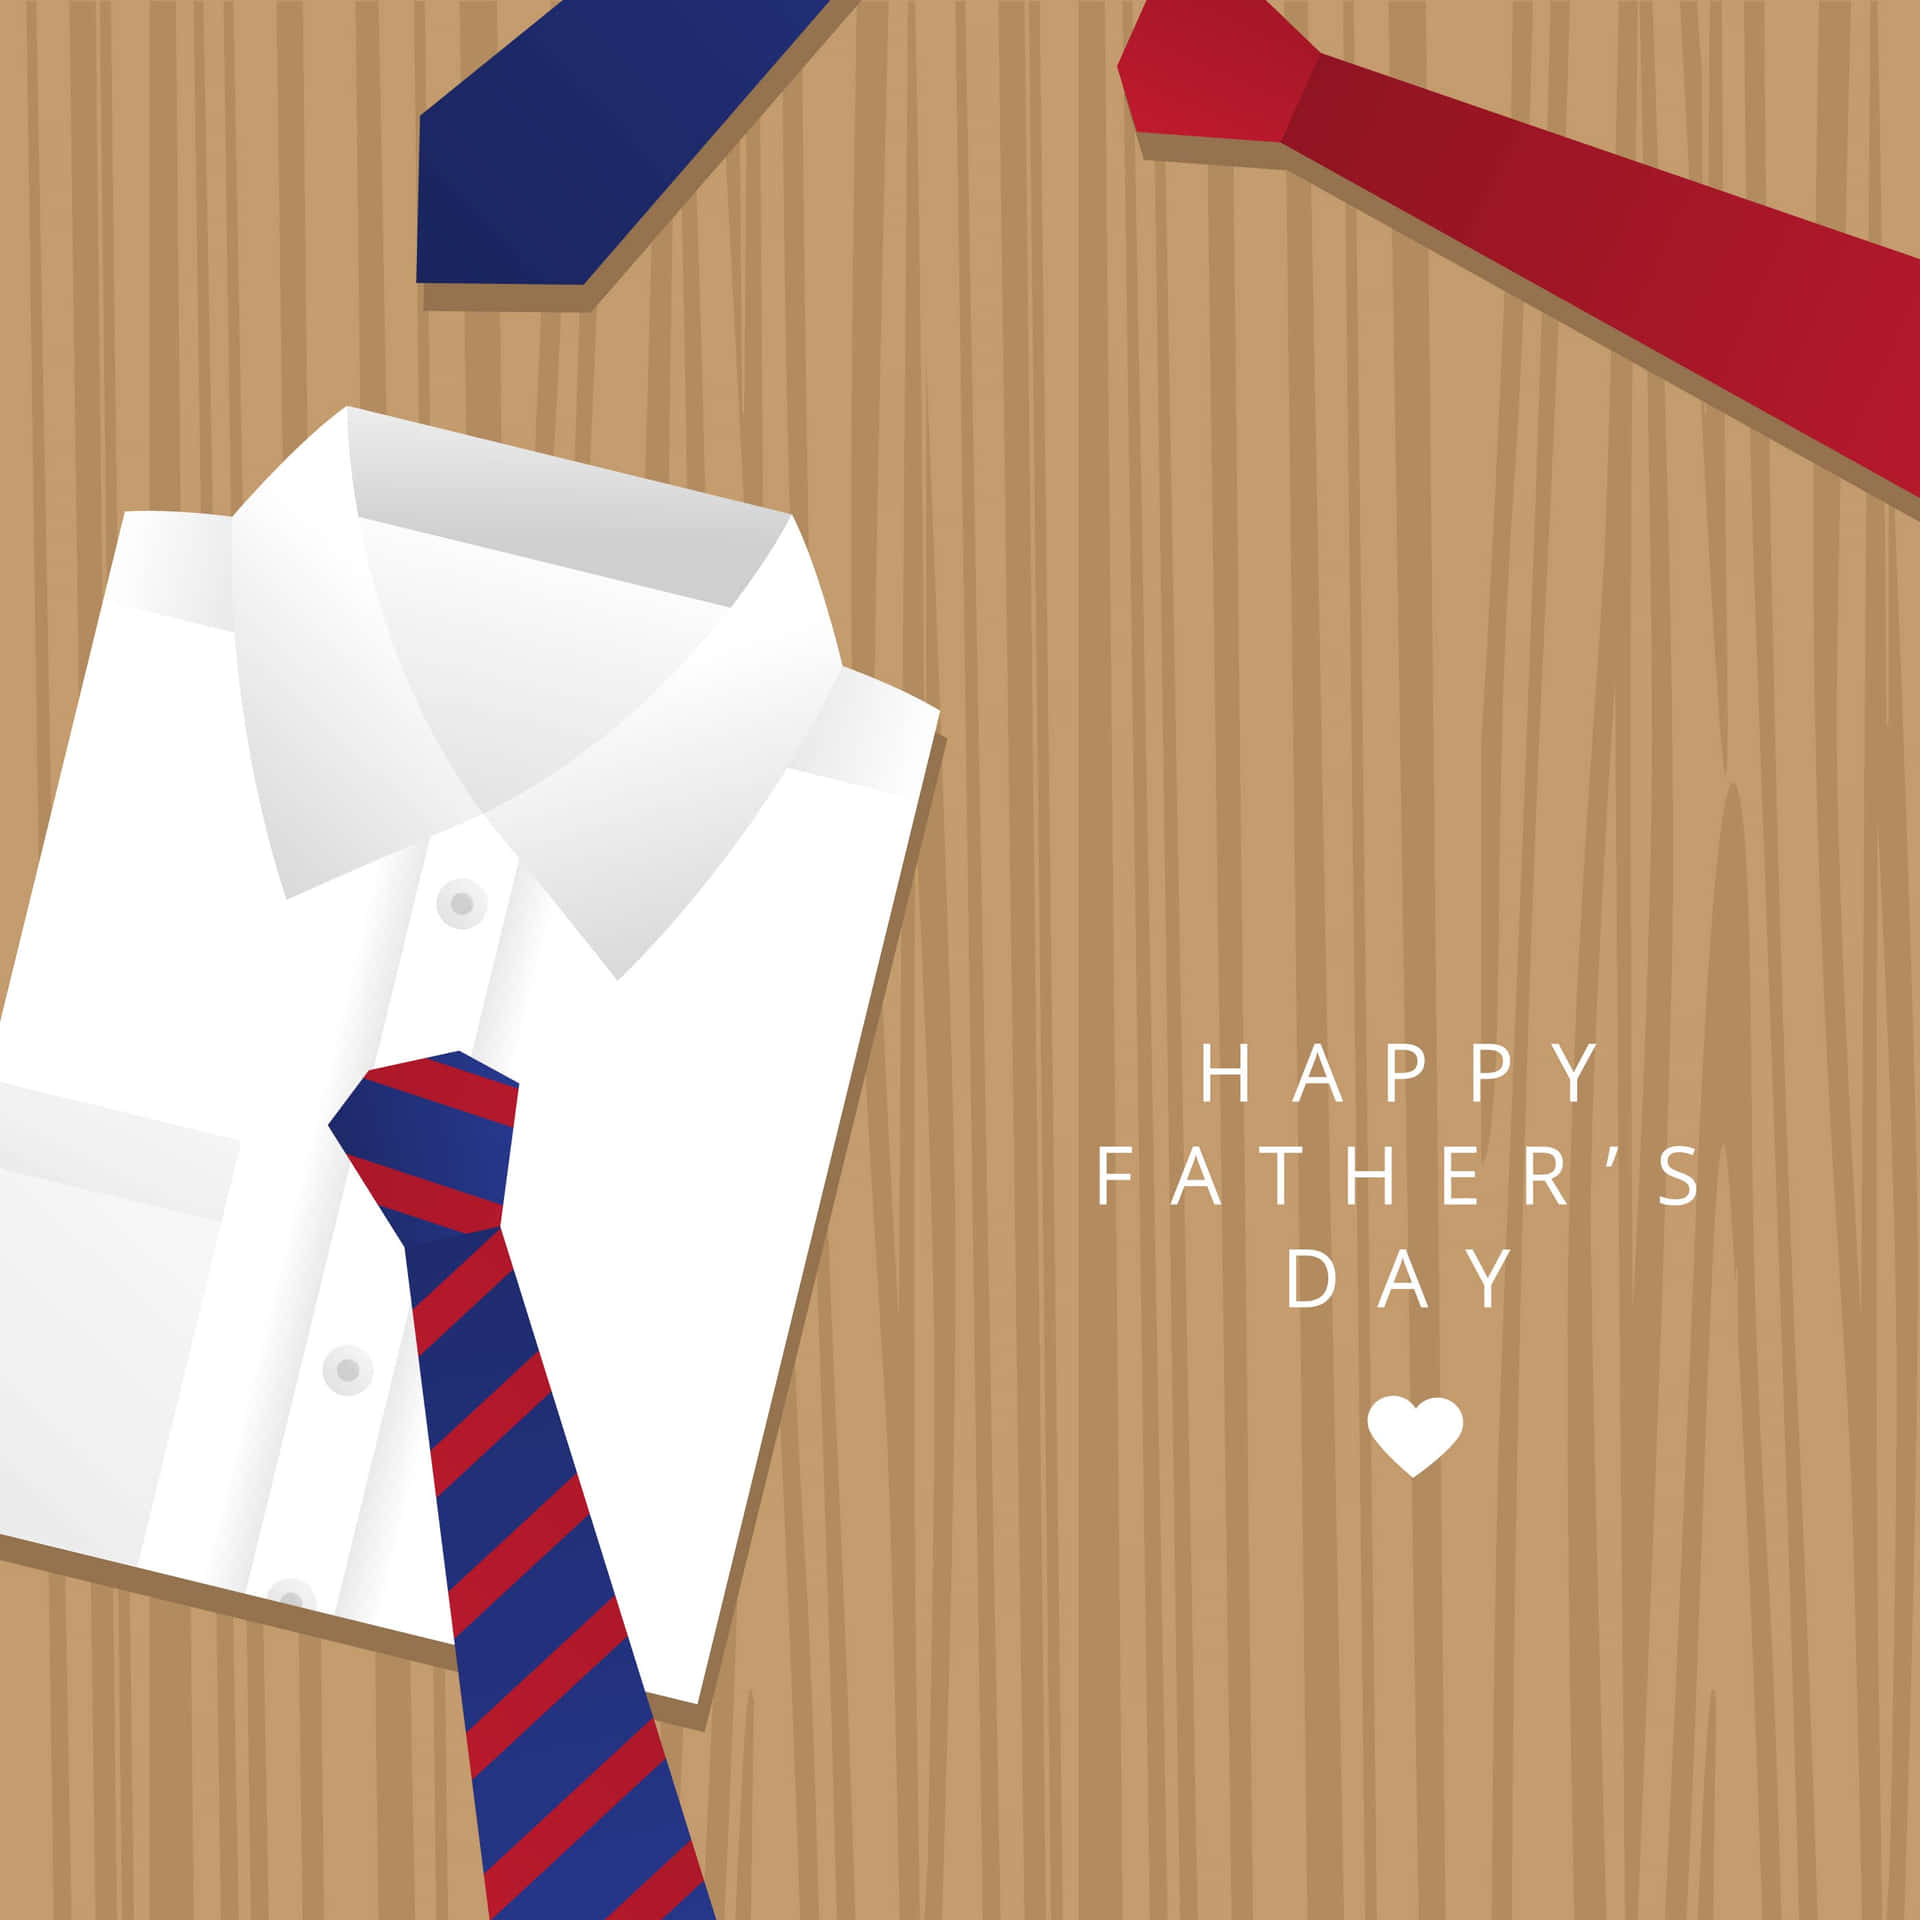 Show your dad some extra love this Father's Day!